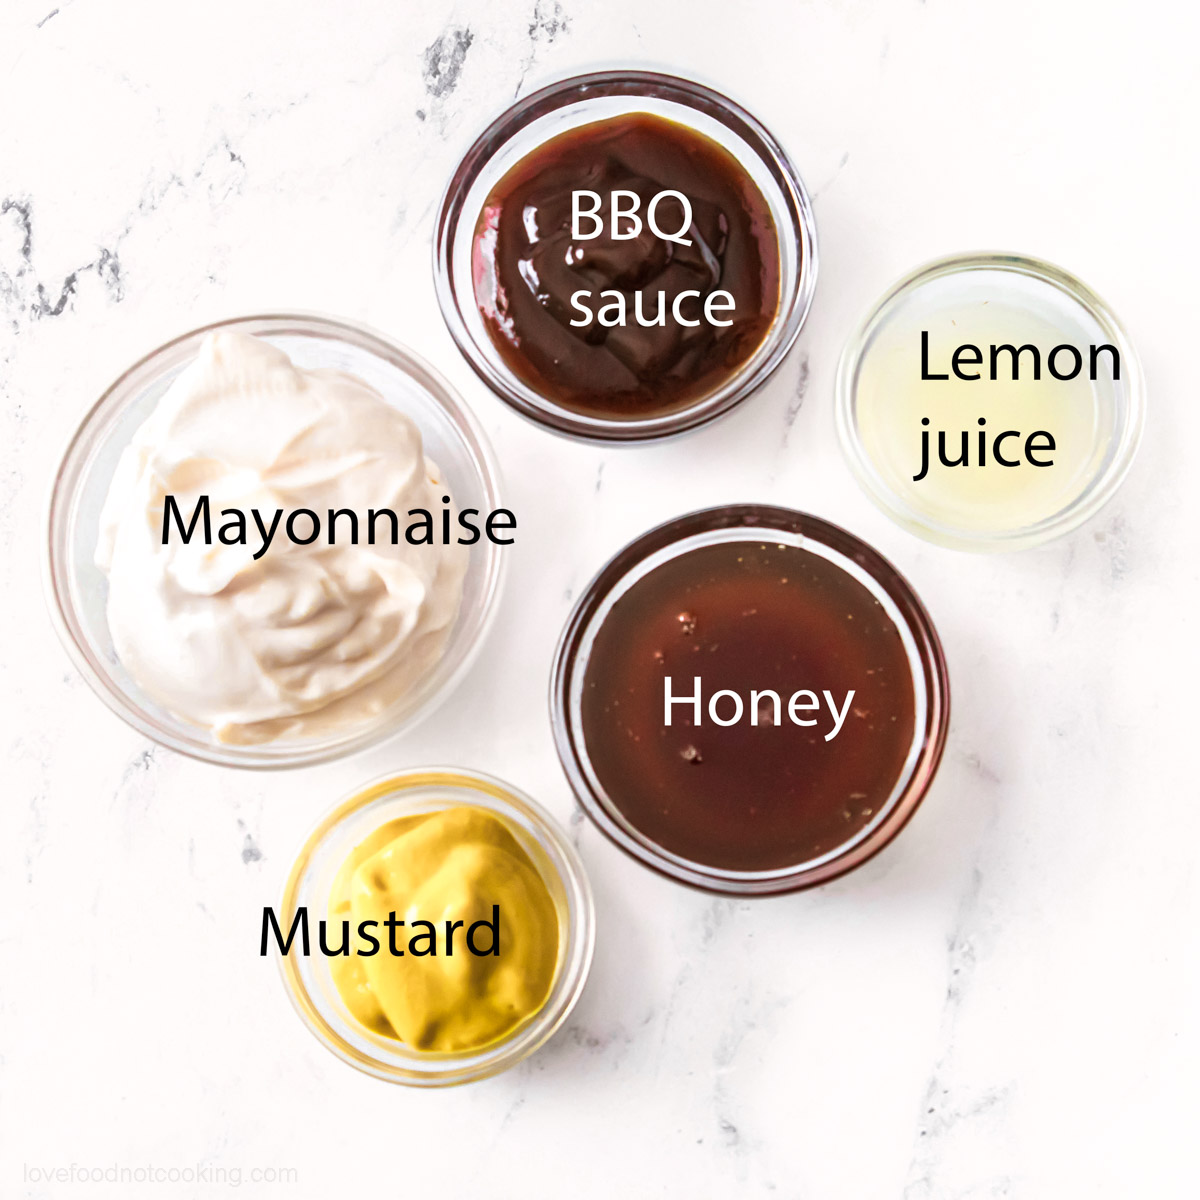 Flat lay photo of the ingredients for Chick-fil-a sauce.